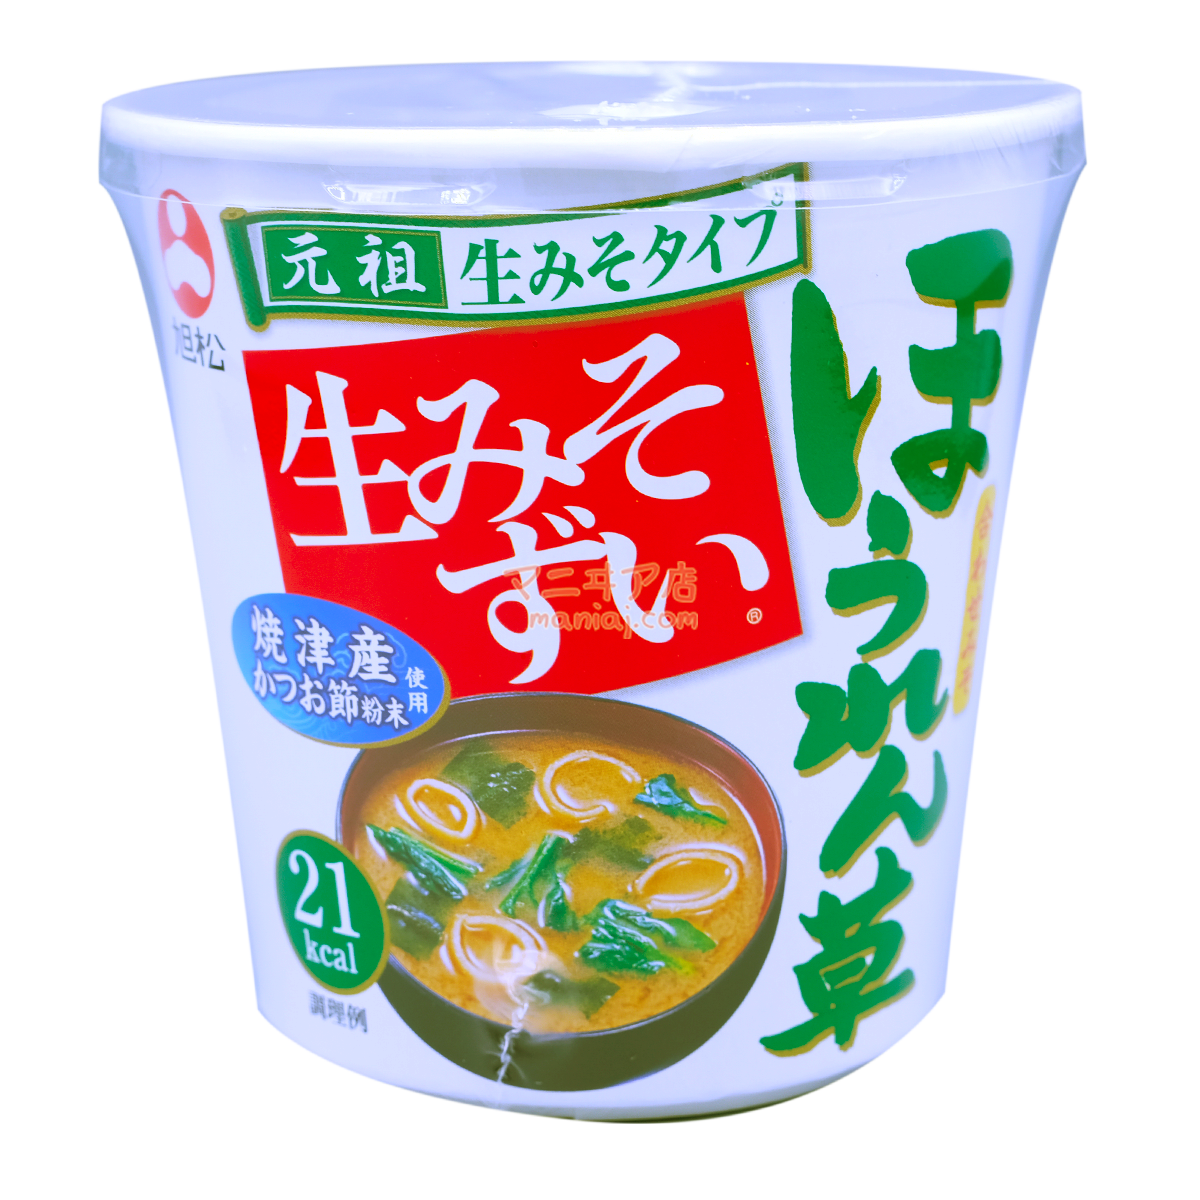 Spinach Miso Soup